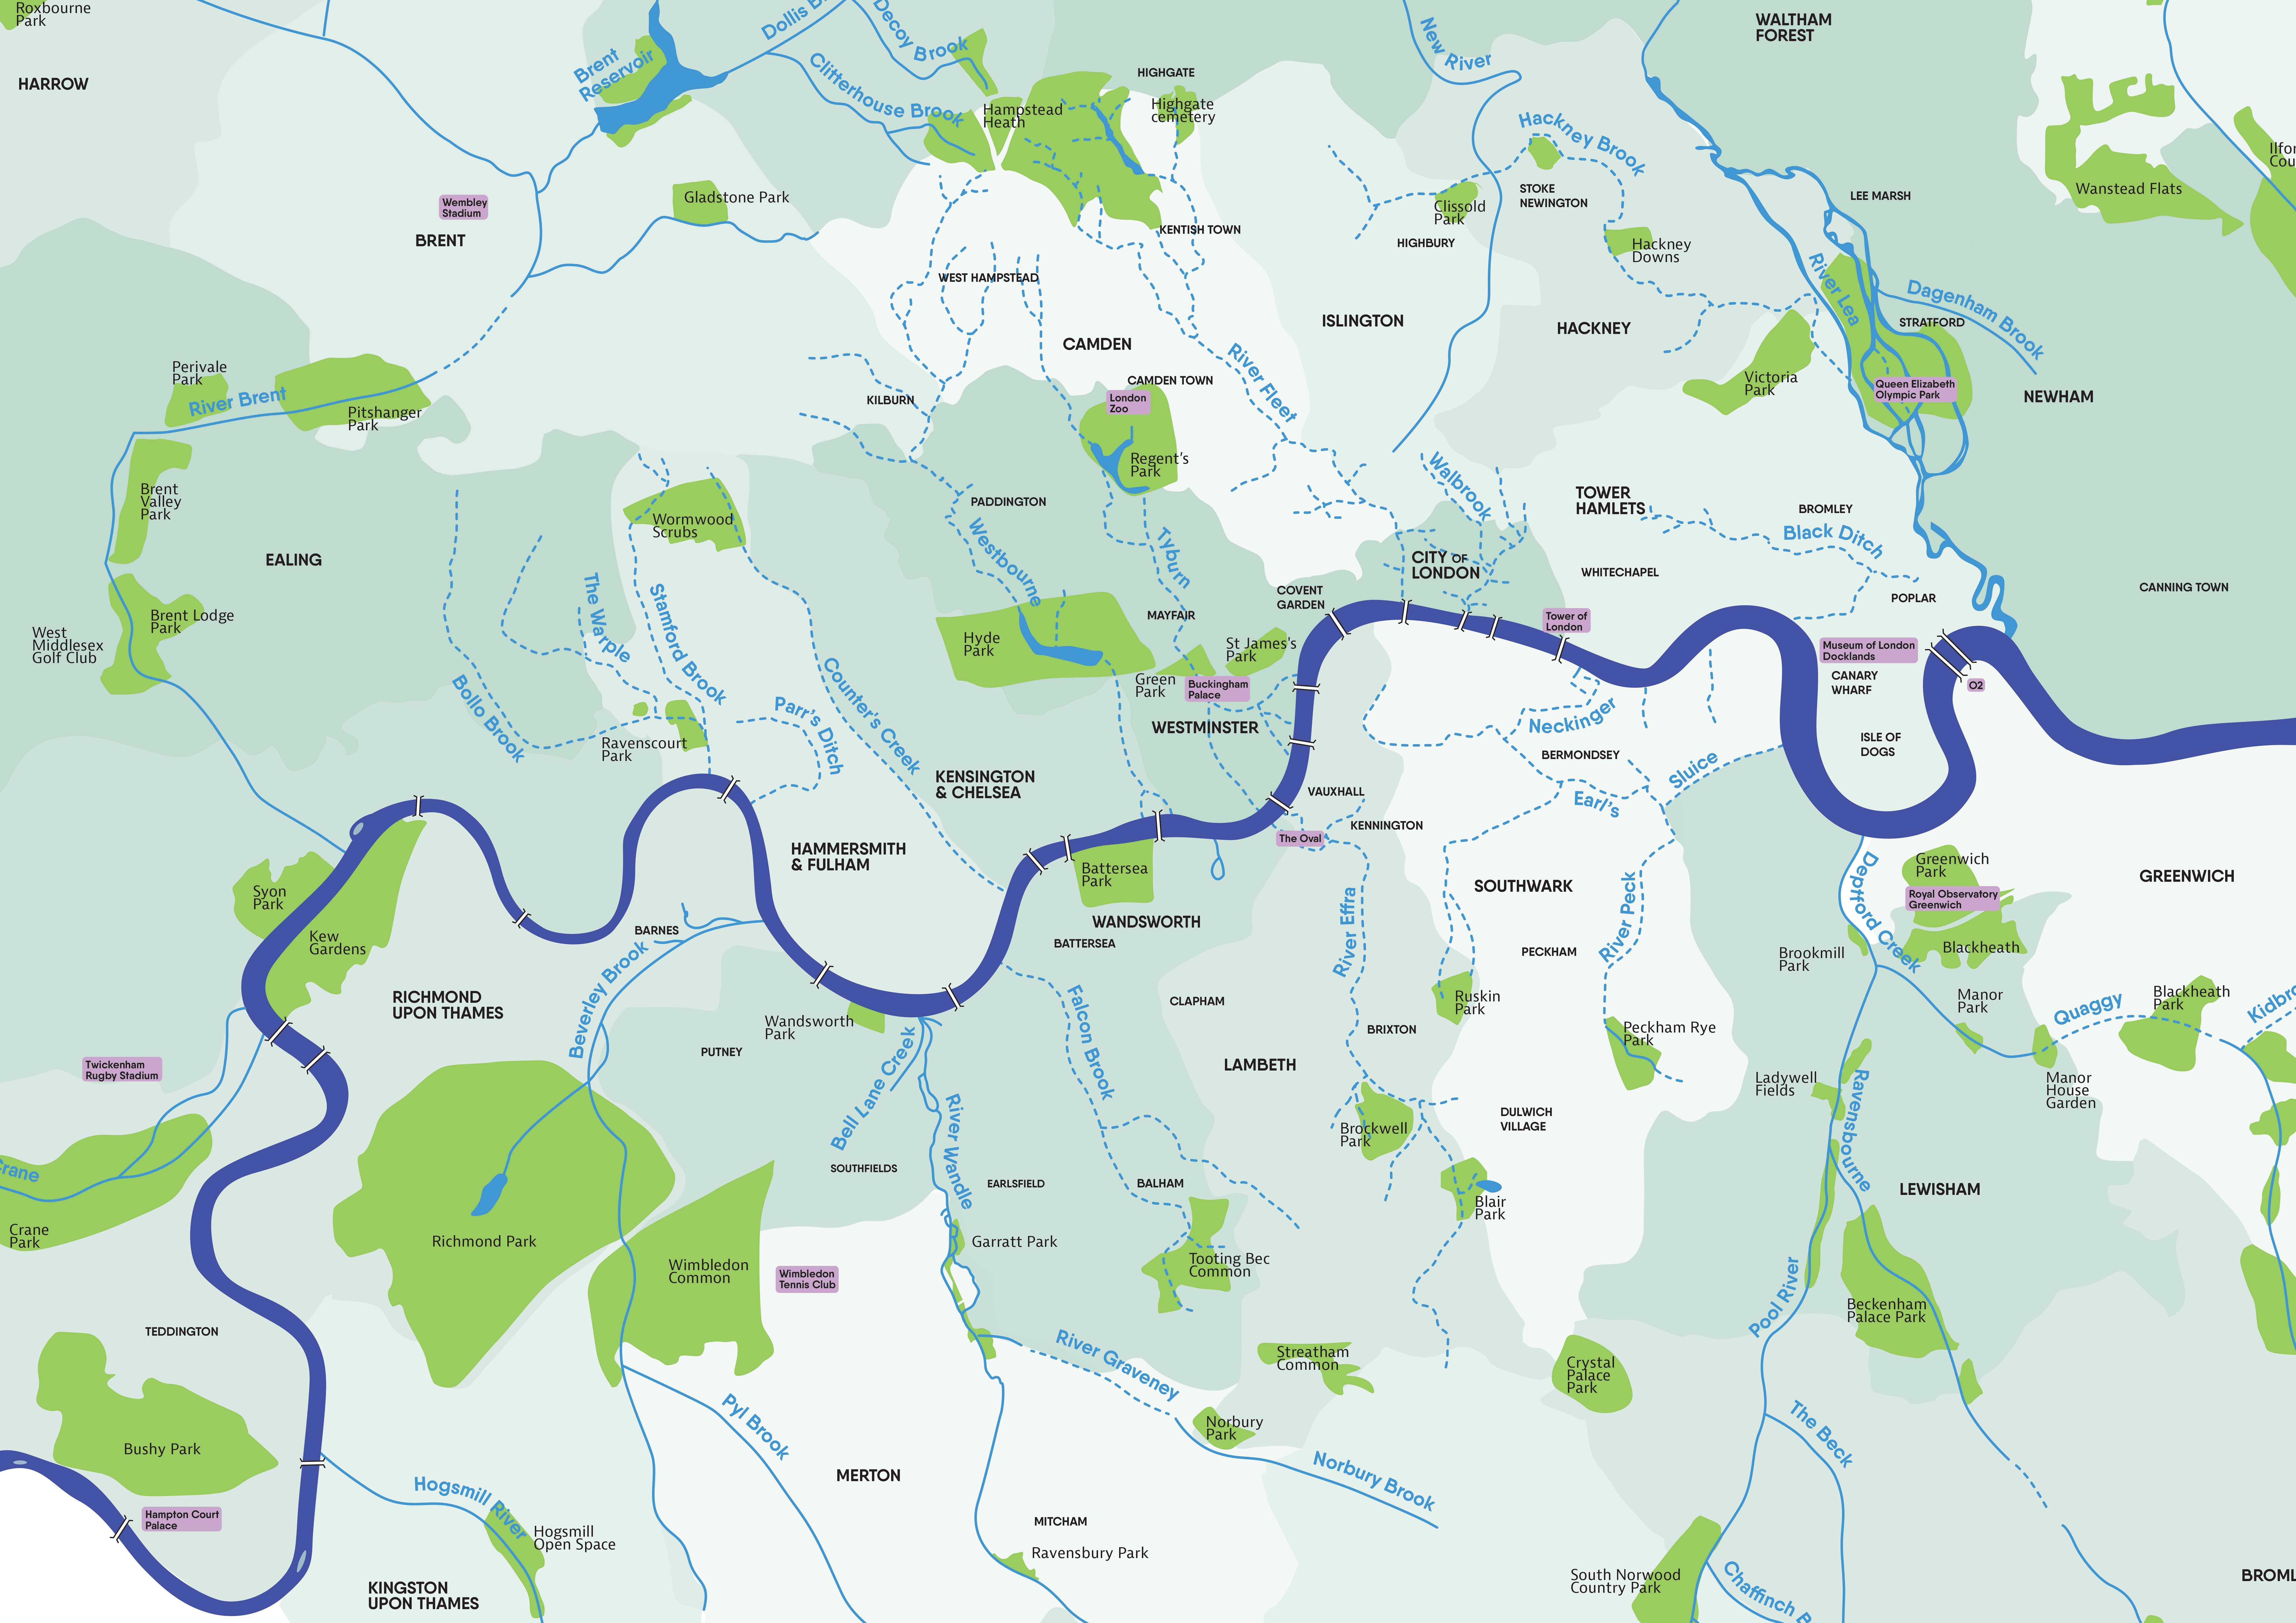 Use this handy map to locate the many waterways that flow into the Thames. Which one is closest to your school?